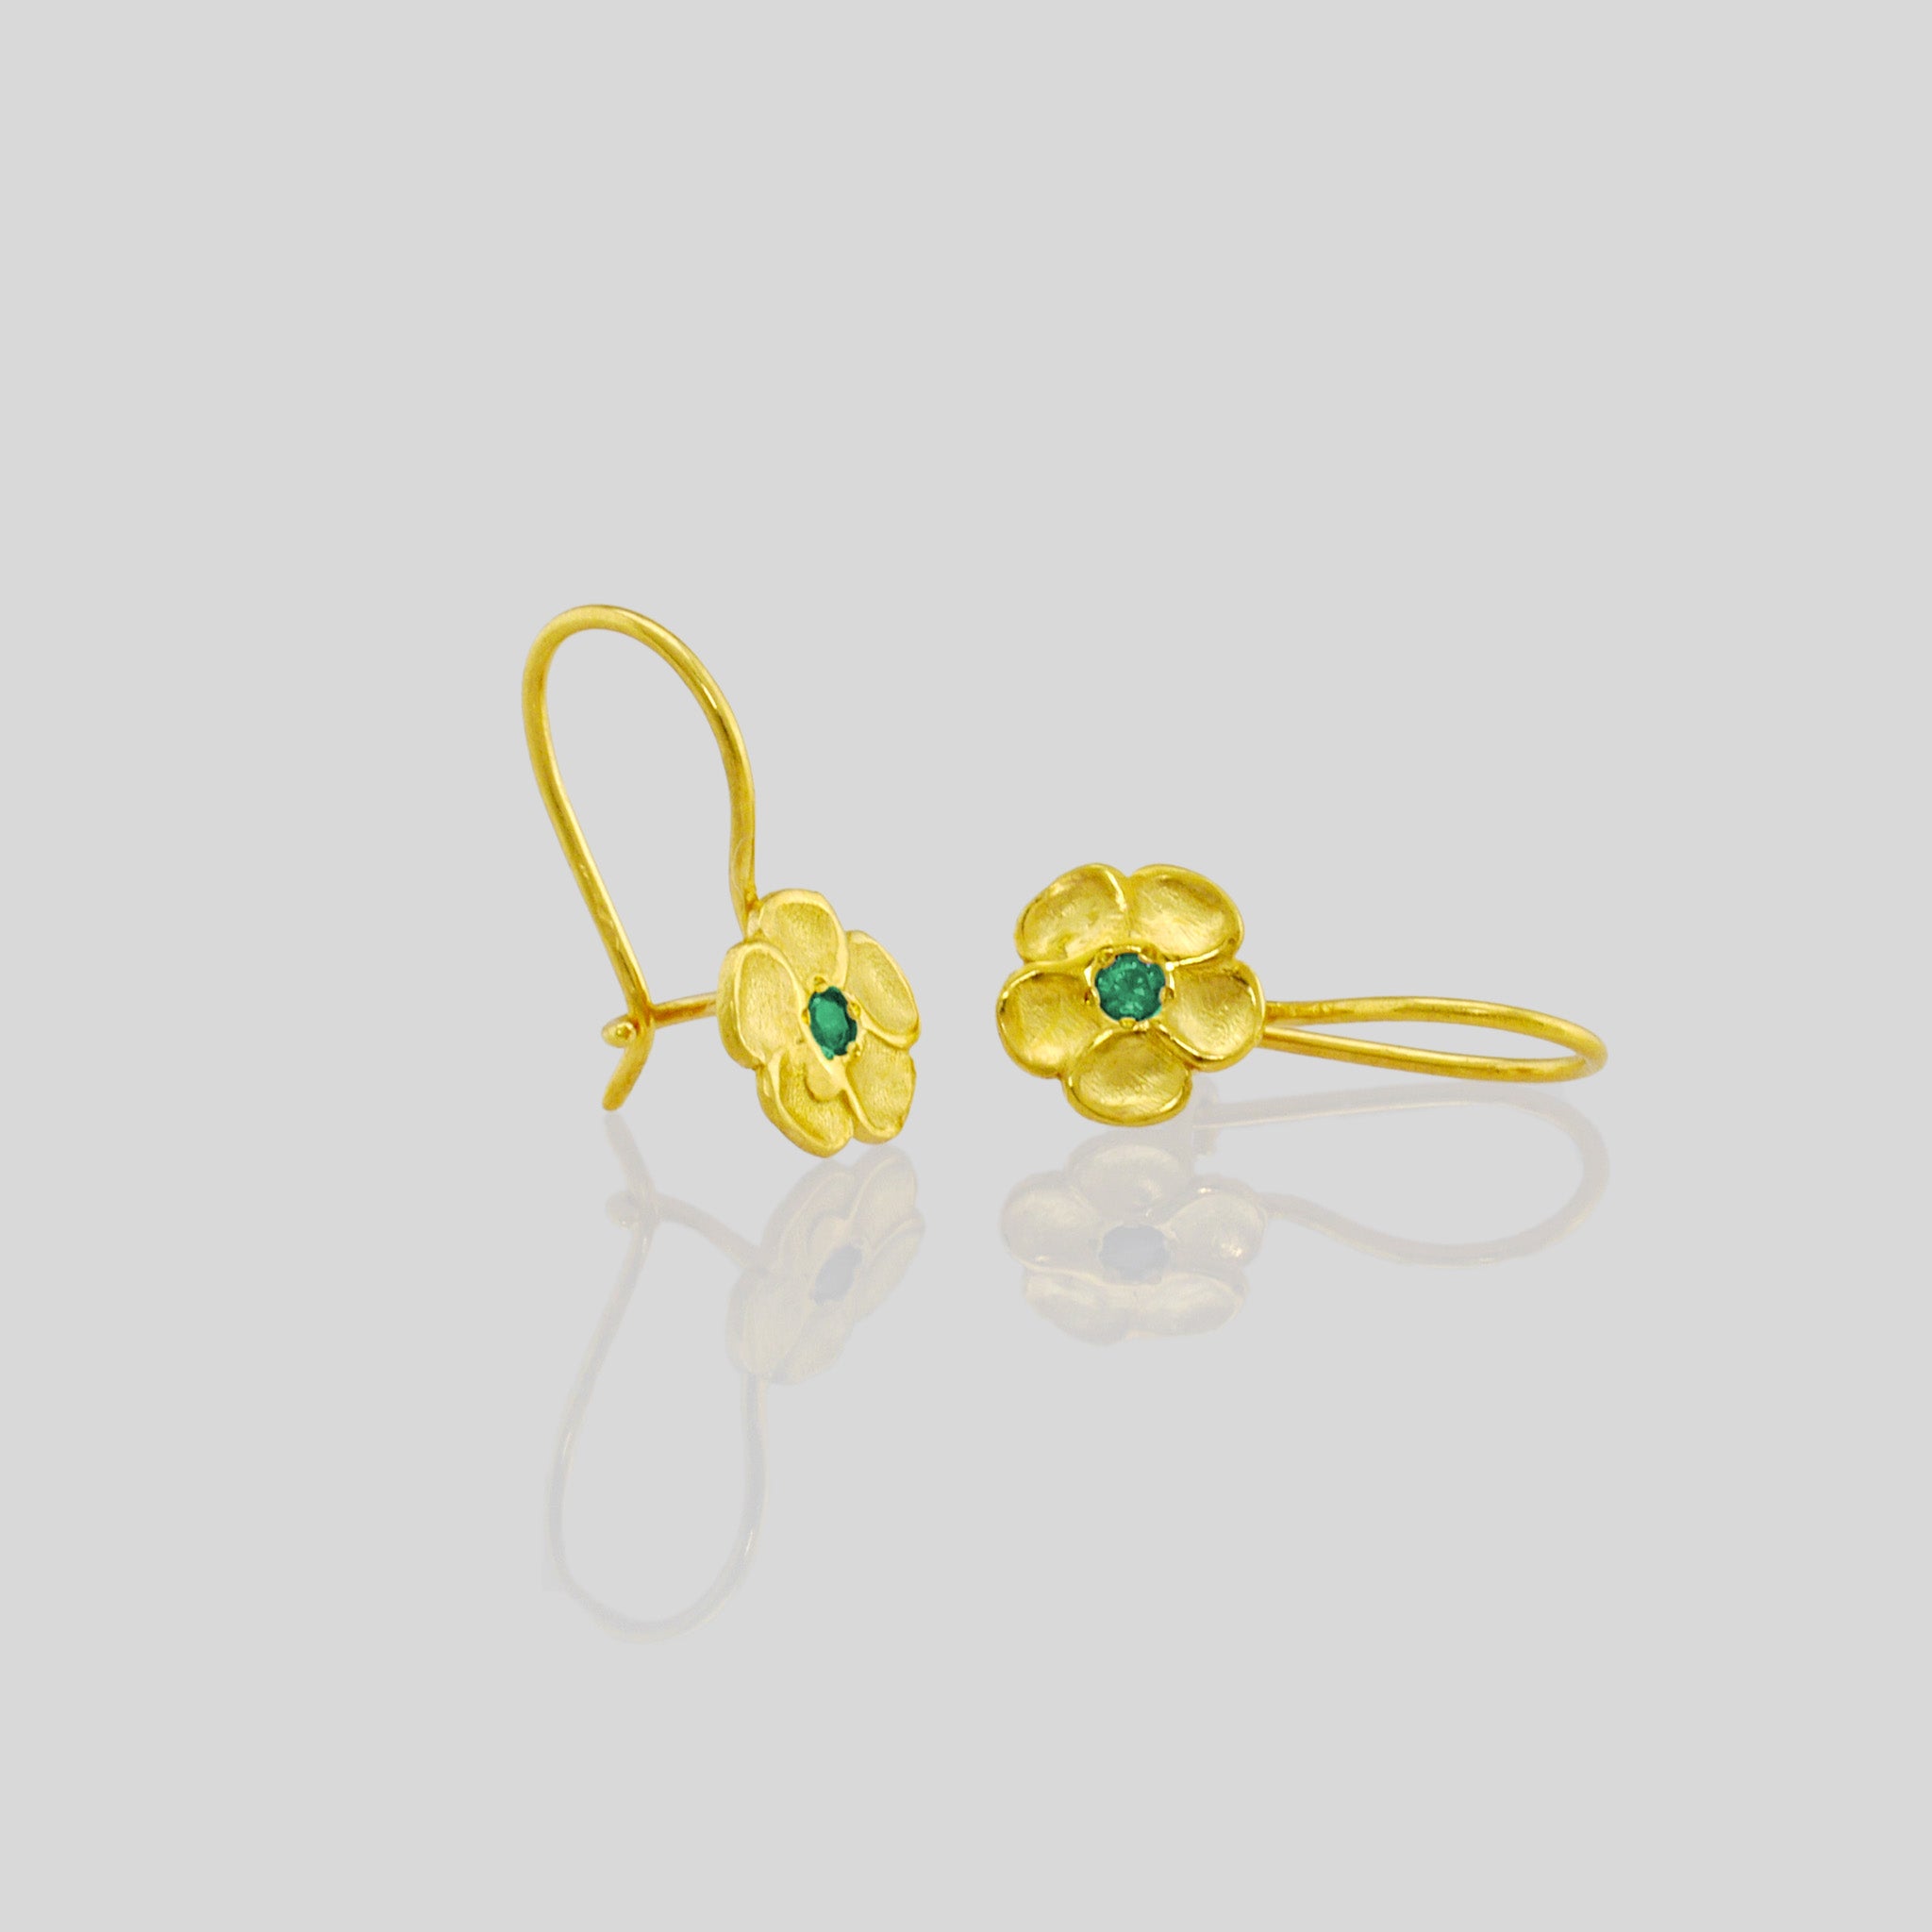 close up of delicate yellow gold flower drop earrings with a sparkling Emerald center. Perfect for any occasion!